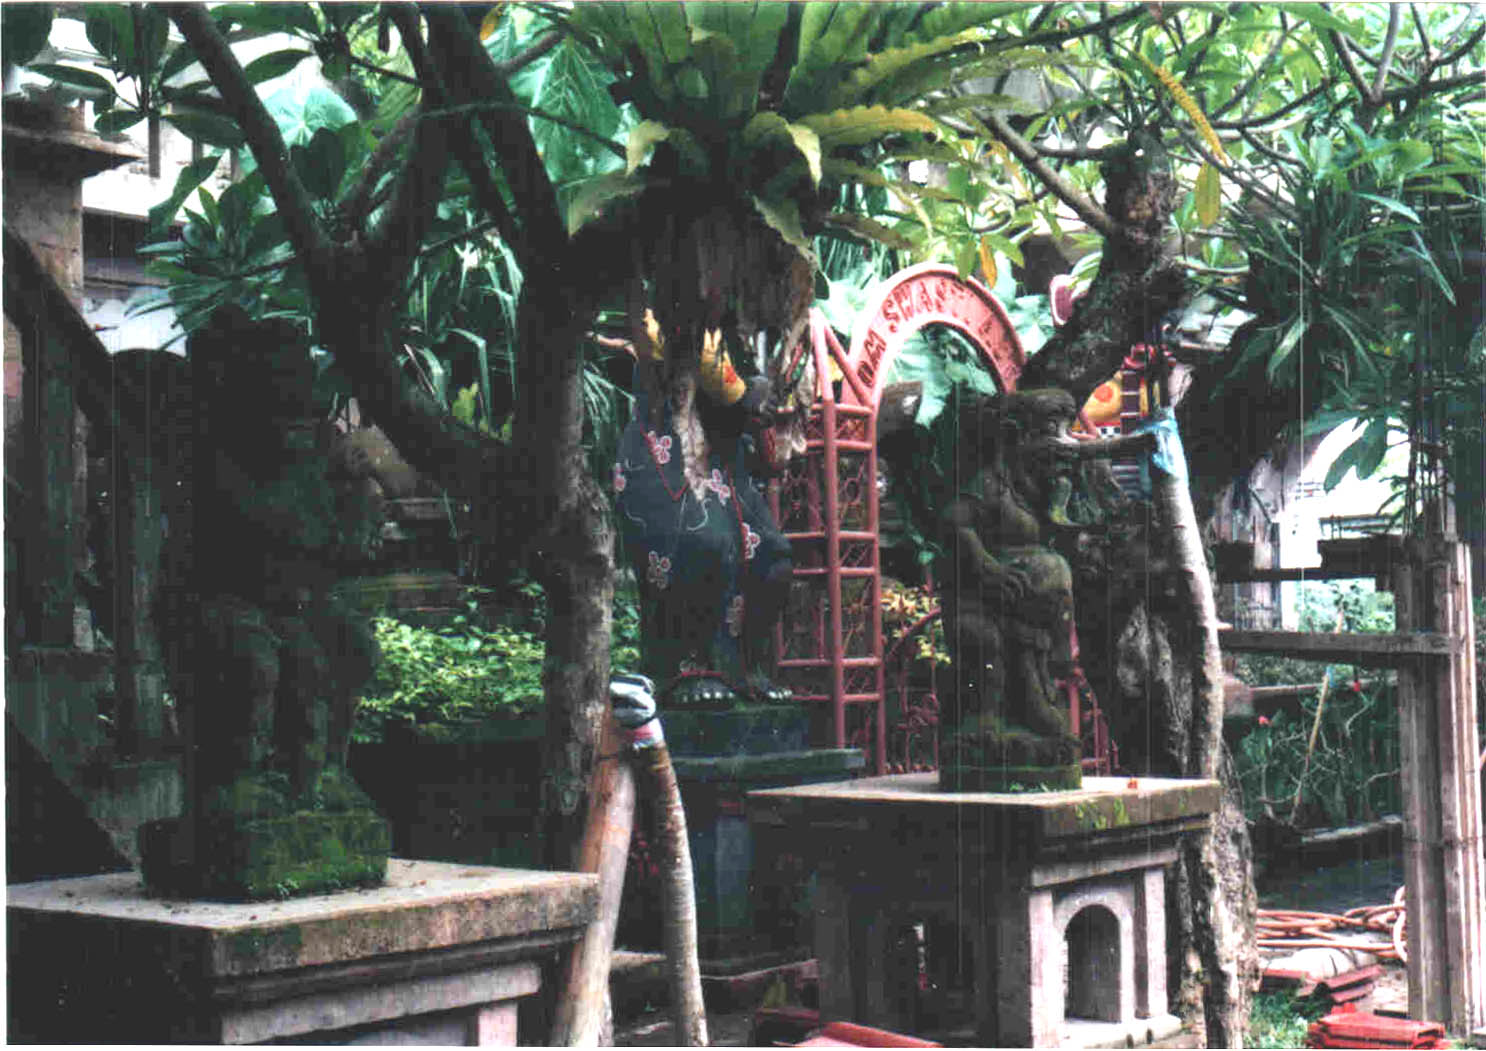 A backyard in Samur, Bali, showing typical private altar/temple setup